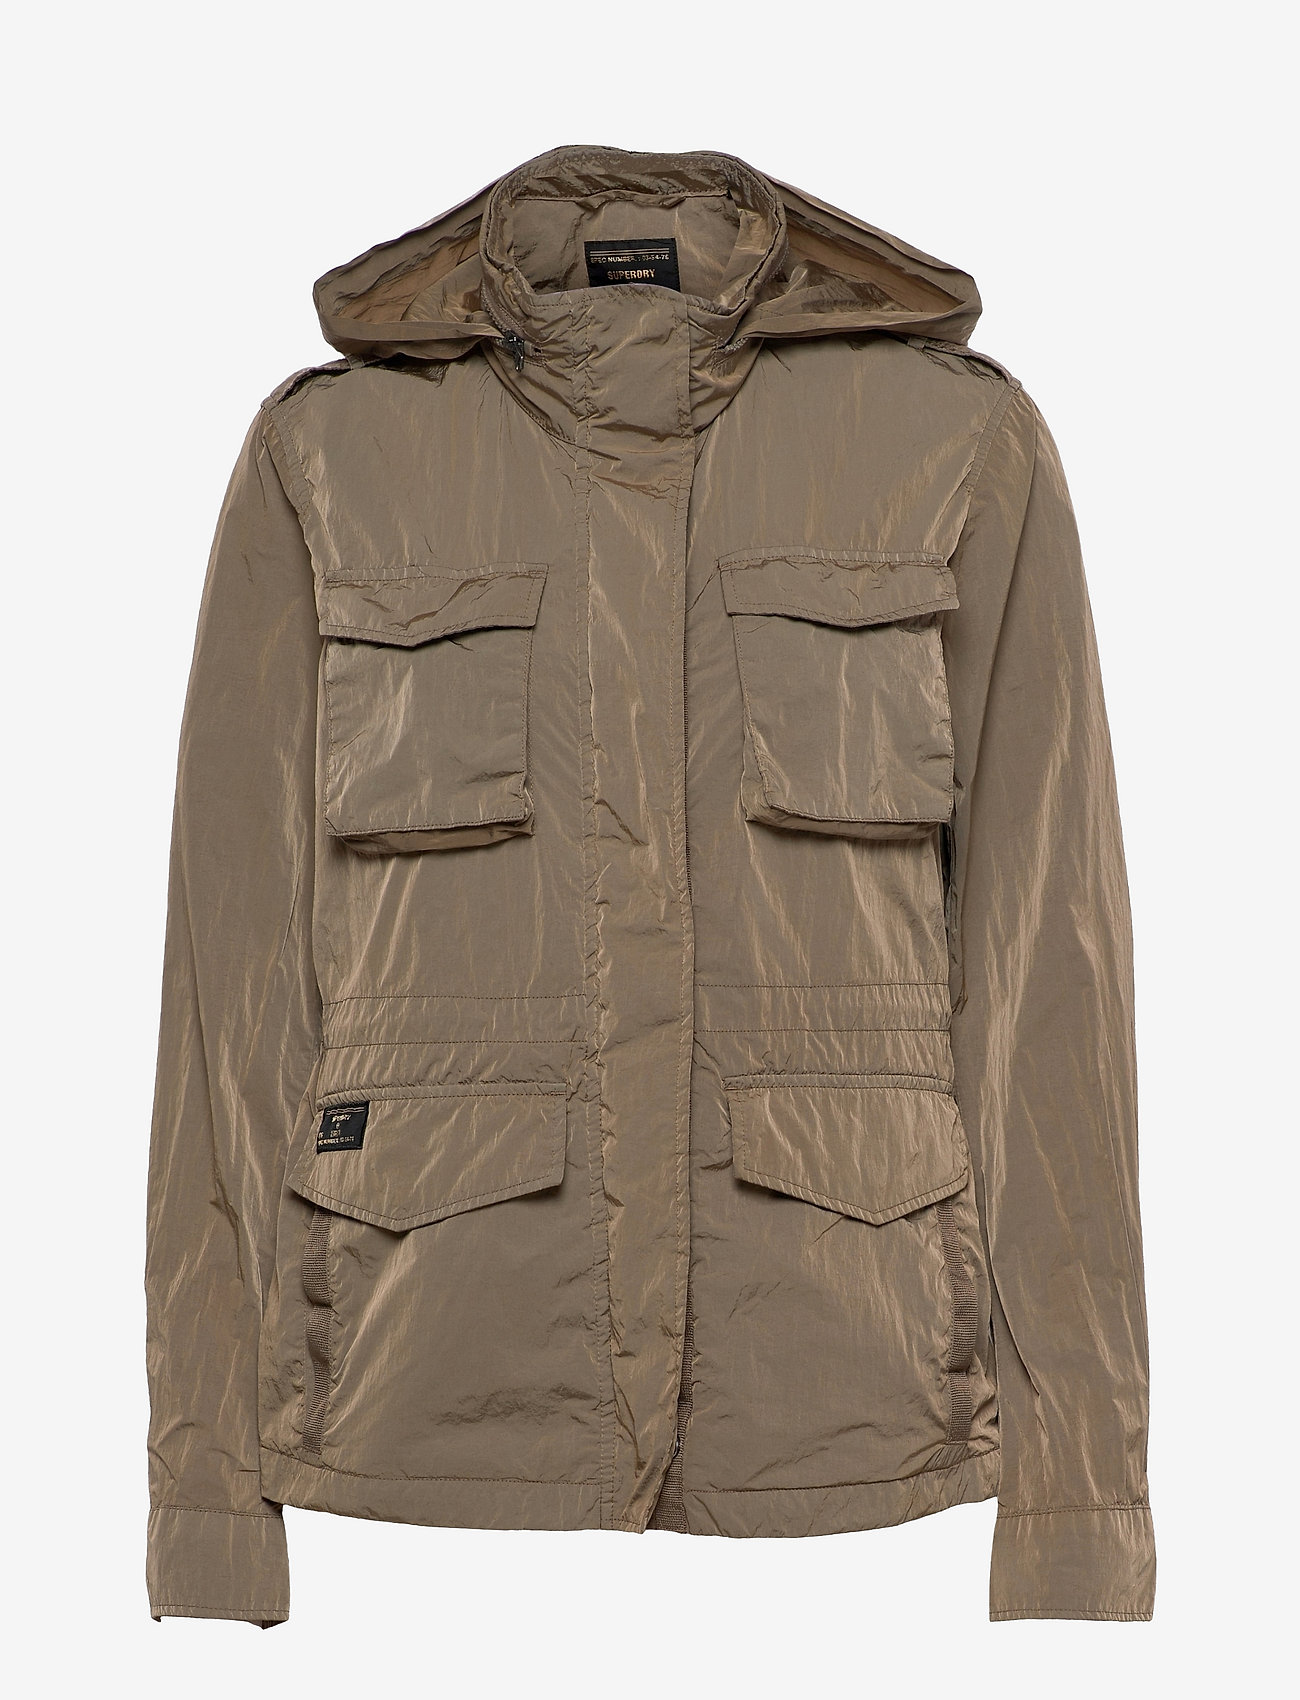 Gewaad Meyella Lunch Superdry New Military M65 - 99.99 €. Buy Utility jackets from Superdry  online at Boozt.com. Fast delivery and easy returns